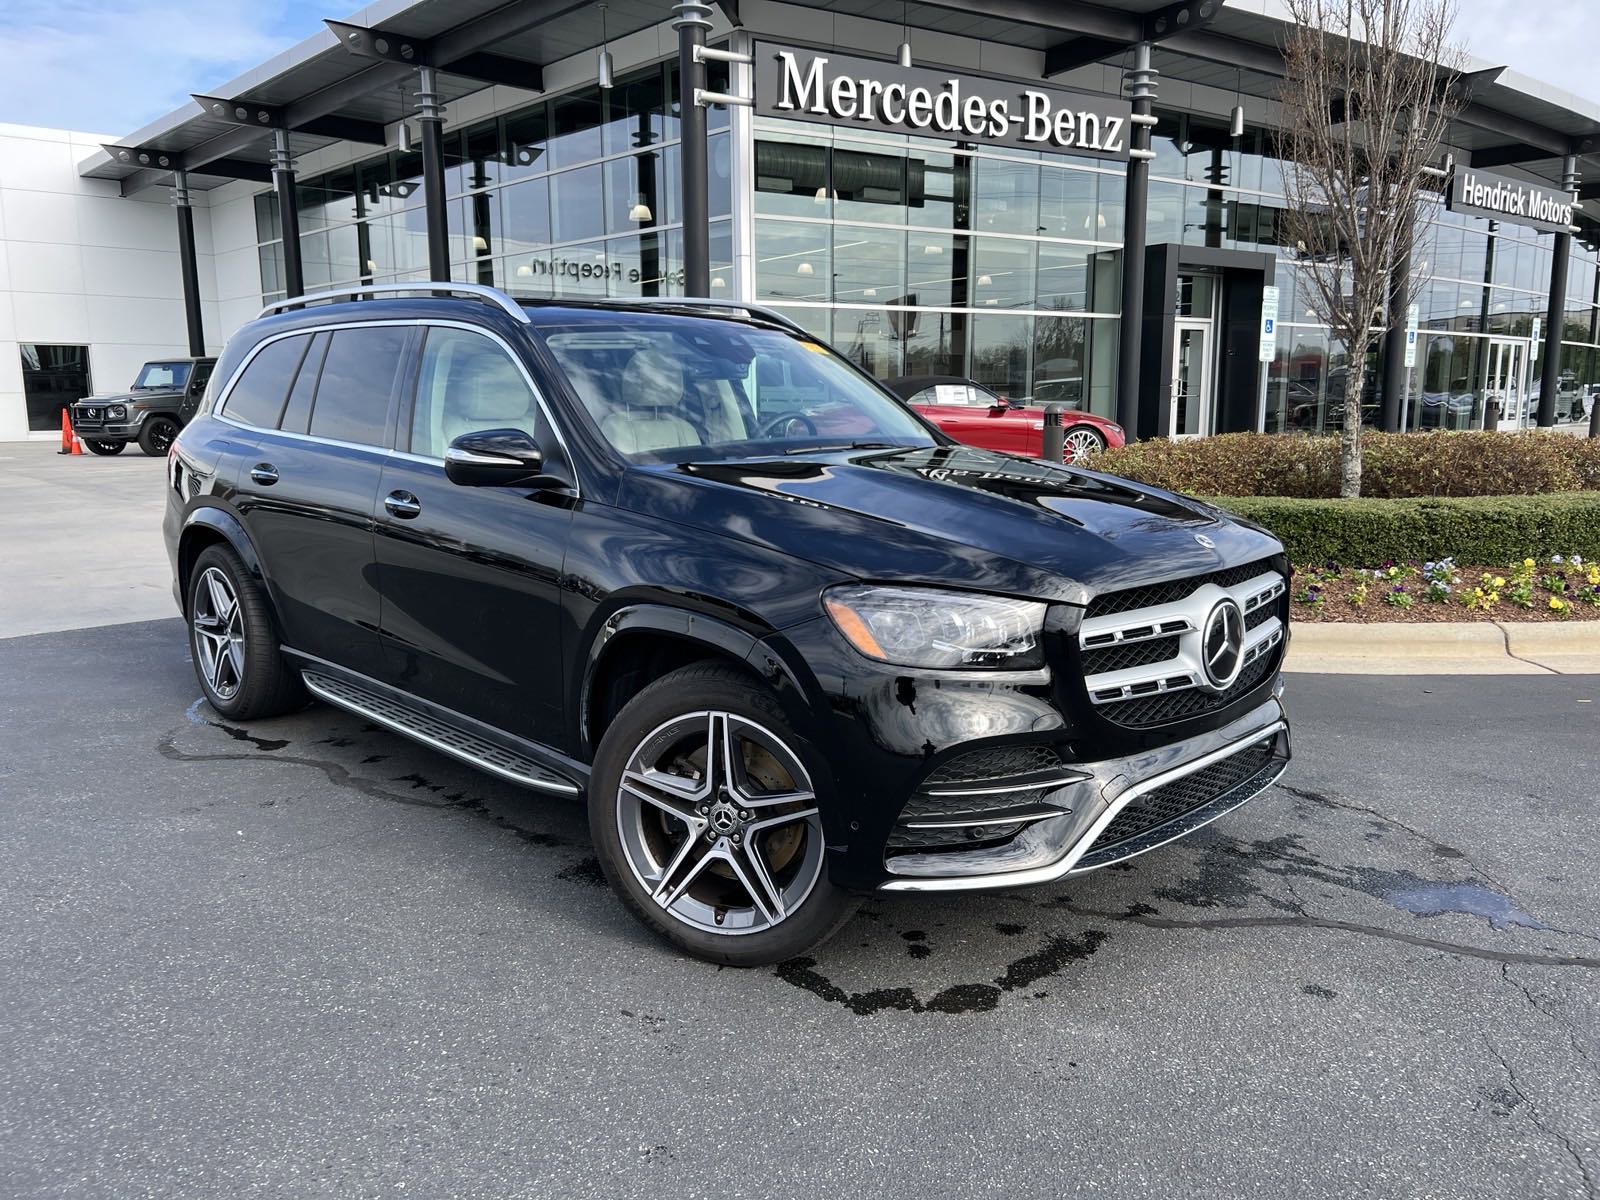 Certified Pre-Owned 2022 Mercedes-Benz GLS 450 SUV in Cary #P3211 |  Hendrick Dodge Cary